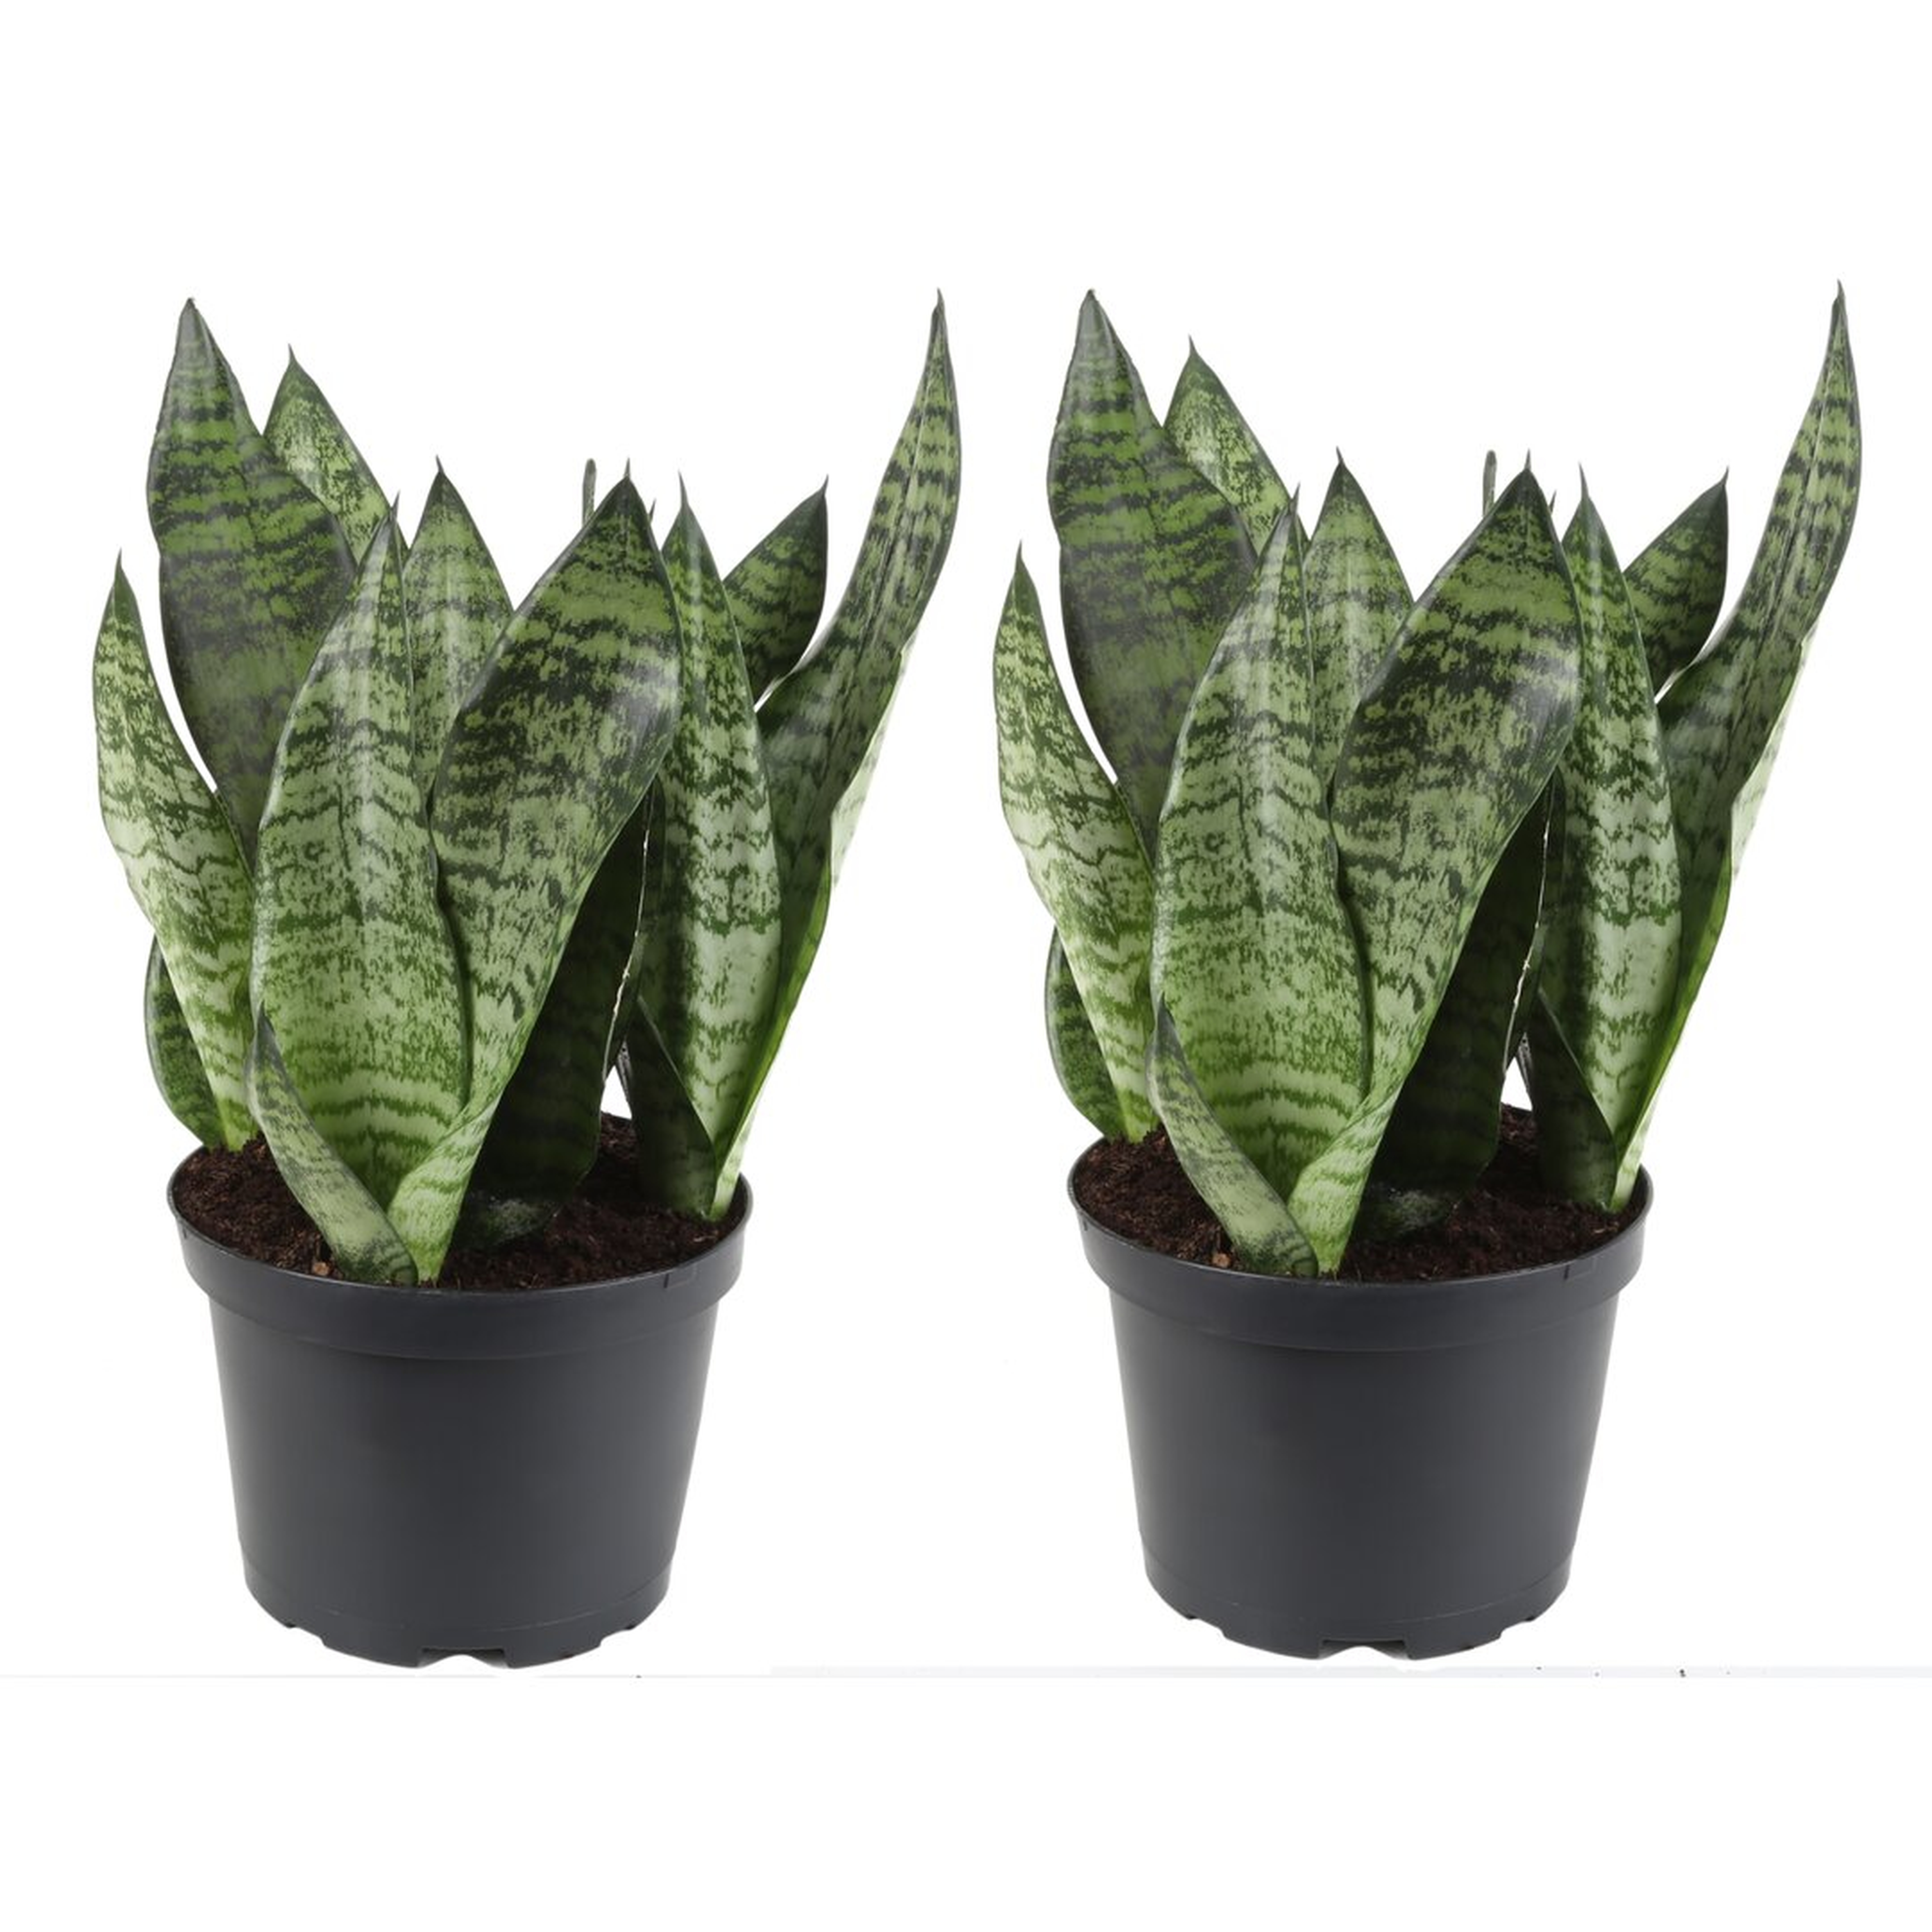 "Costa Farms Snake Plant In Grower Pot" - Perigold